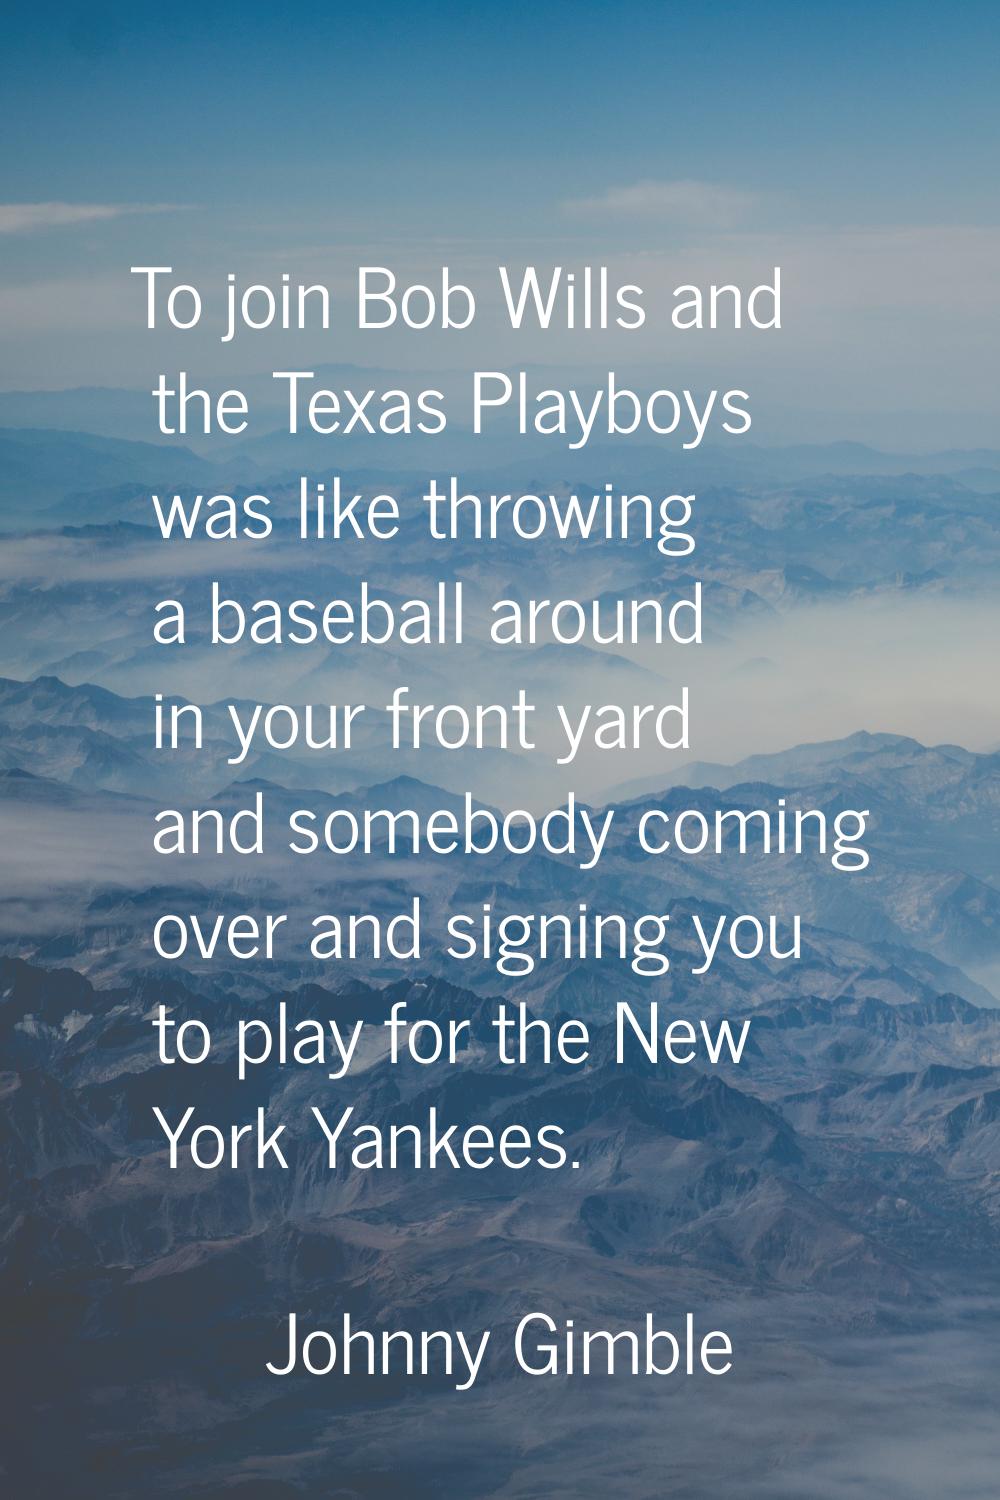 To join Bob Wills and the Texas Playboys was like throwing a baseball around in your front yard and